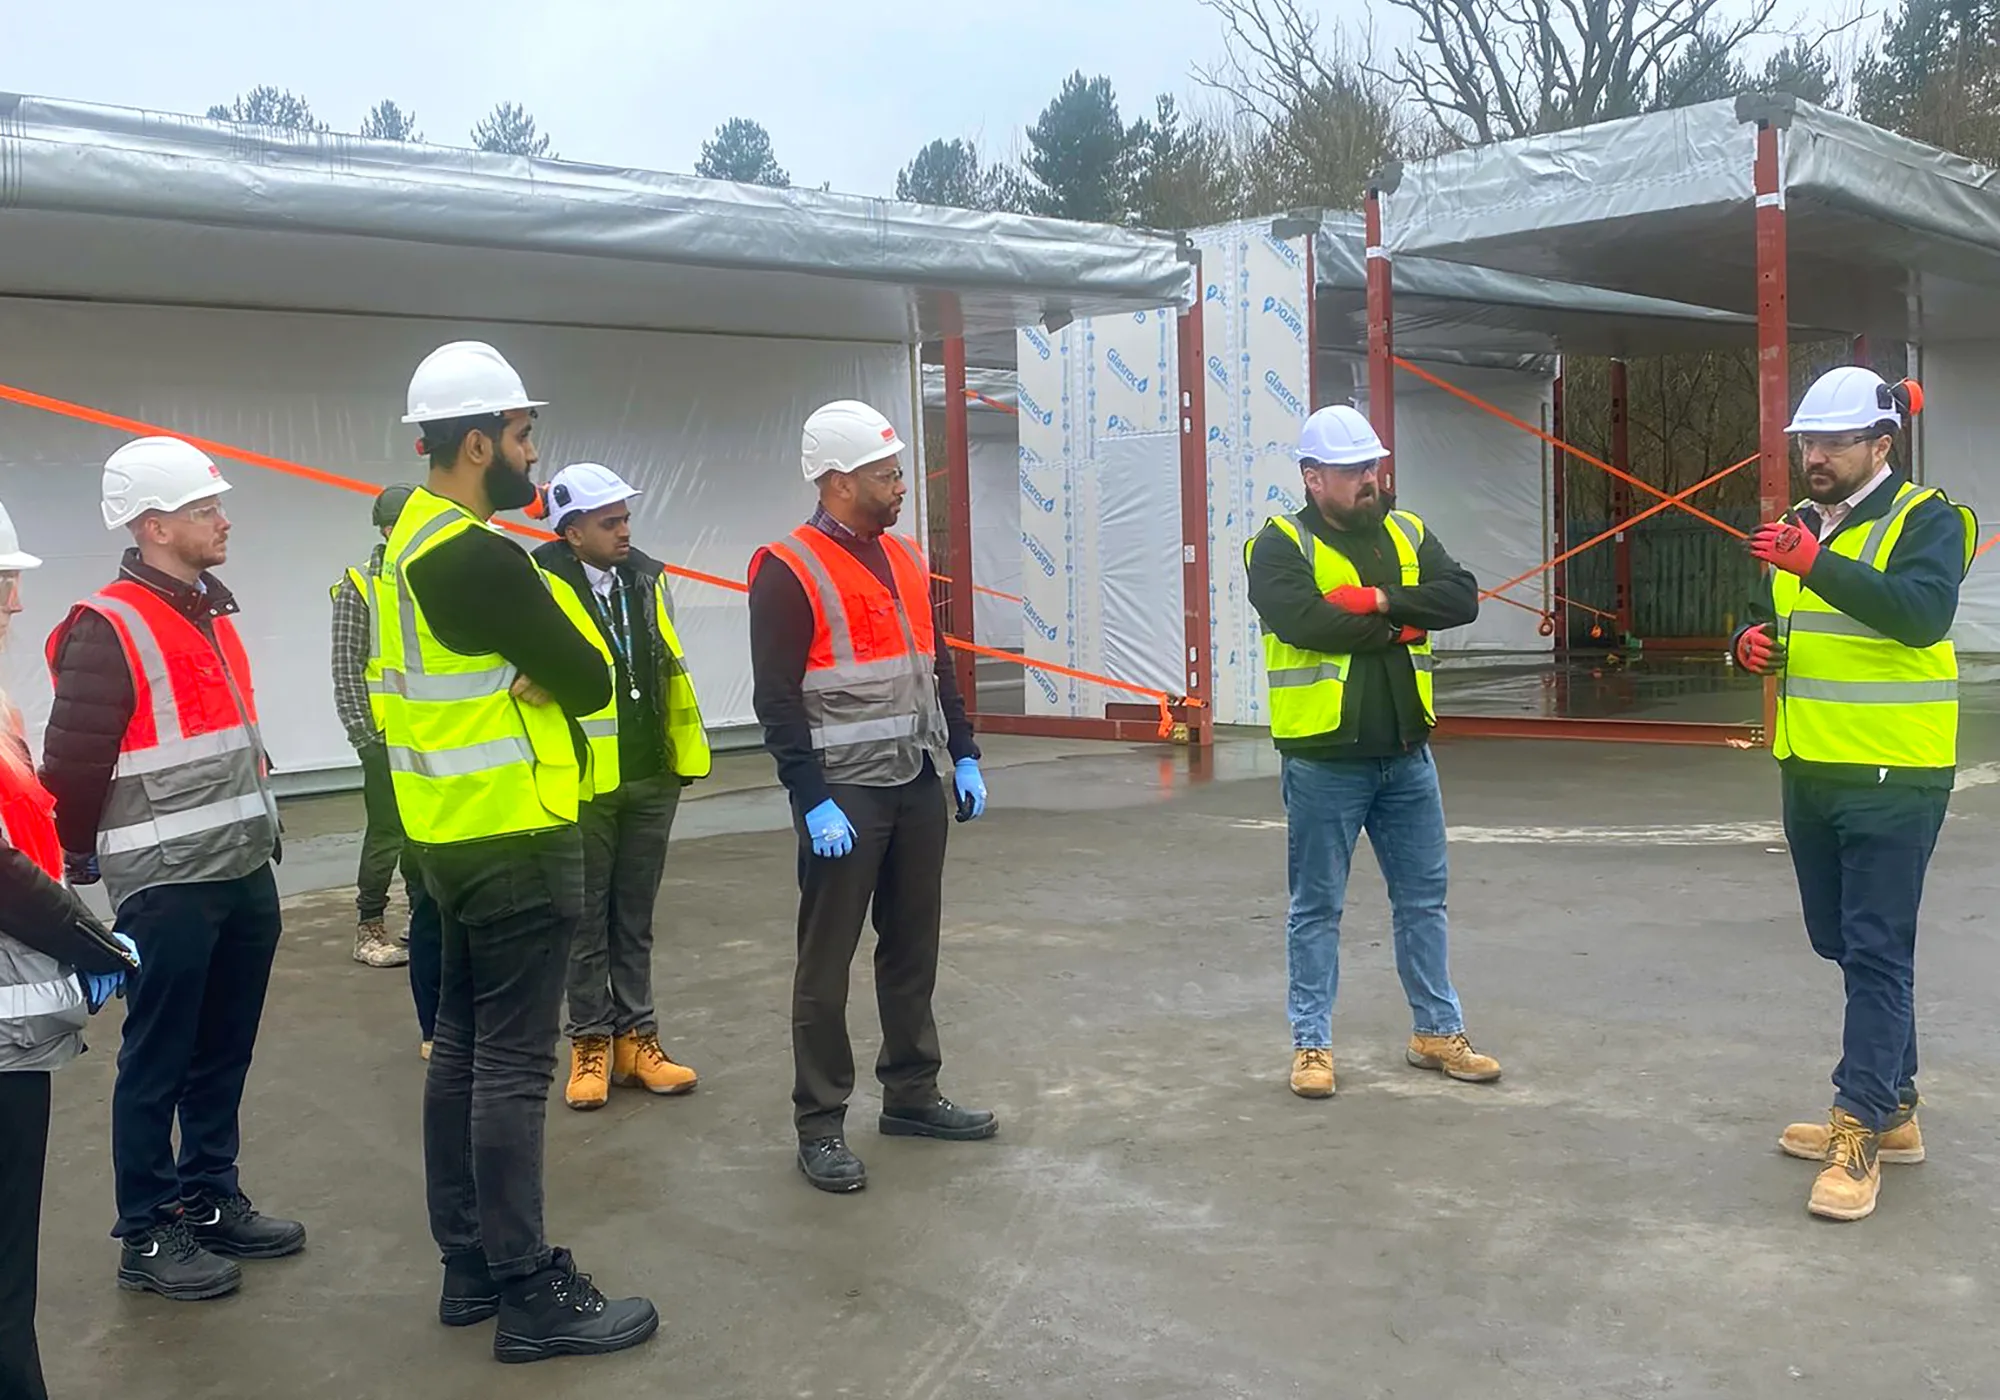 Adrian at the Darwin Group productions facility, showing under construction modules to a group of visitors. All are wearing hi-vis and hard hats.